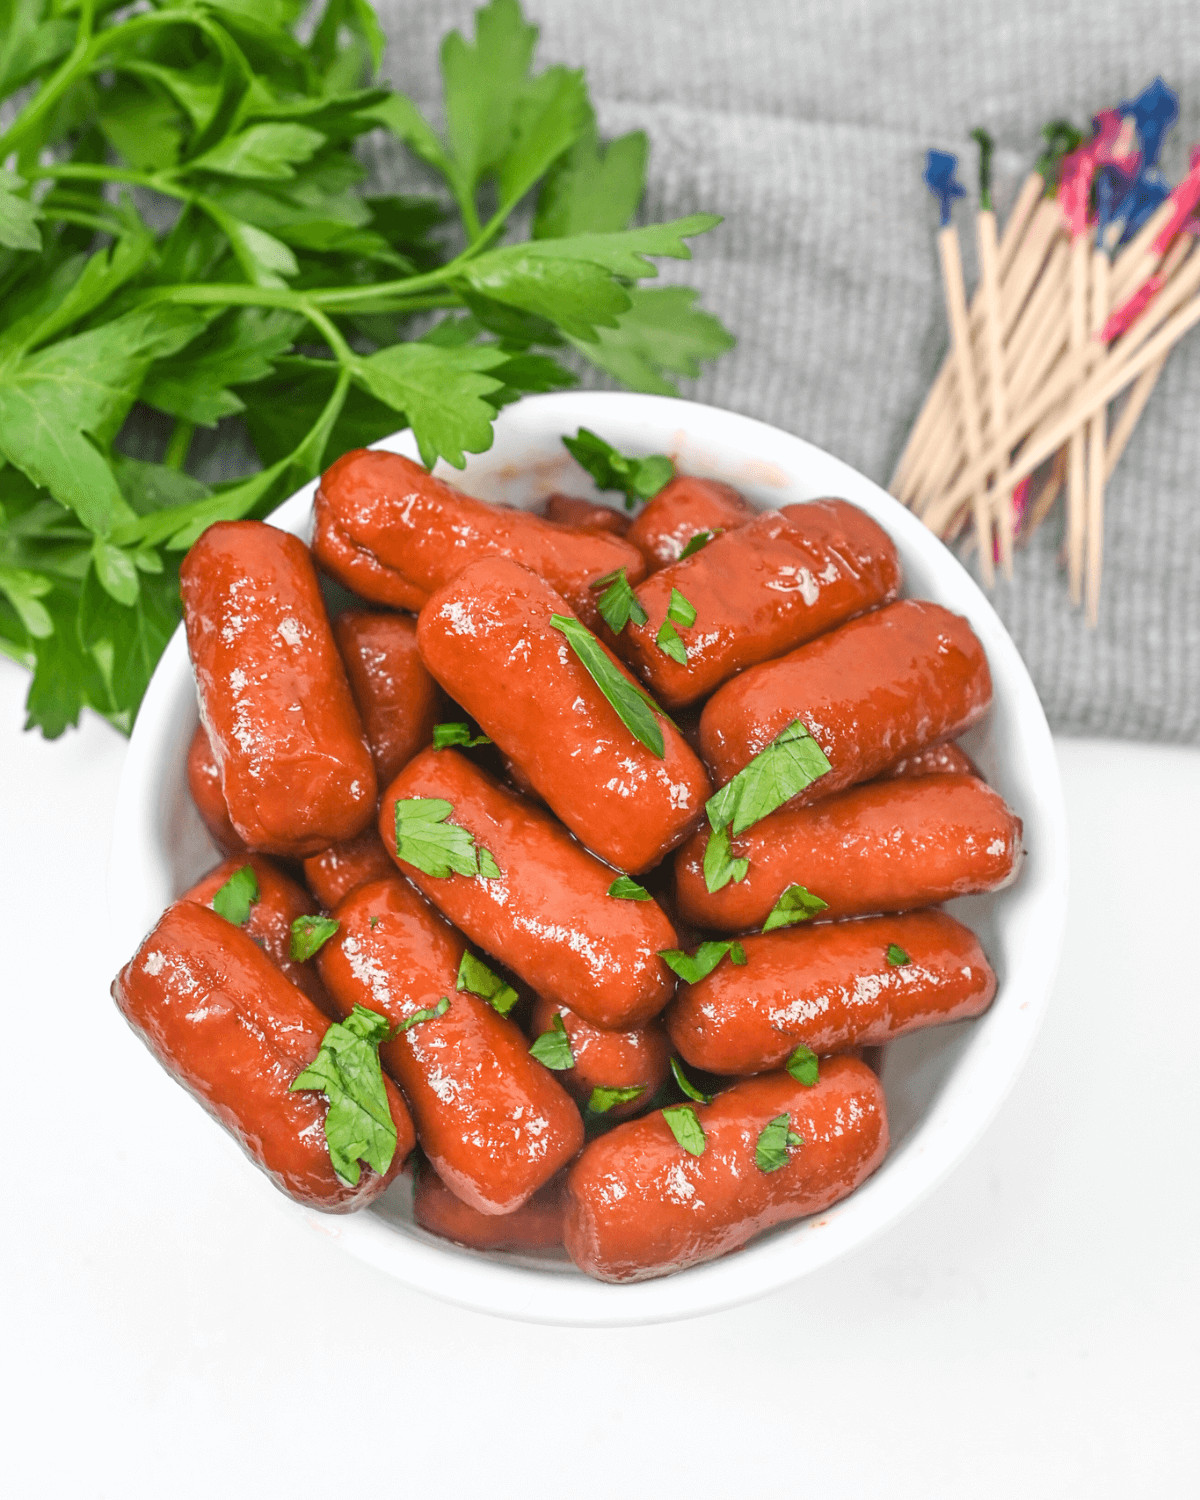 Crock pot little smokies recipe served in a bowl with parsley and matchsticks.